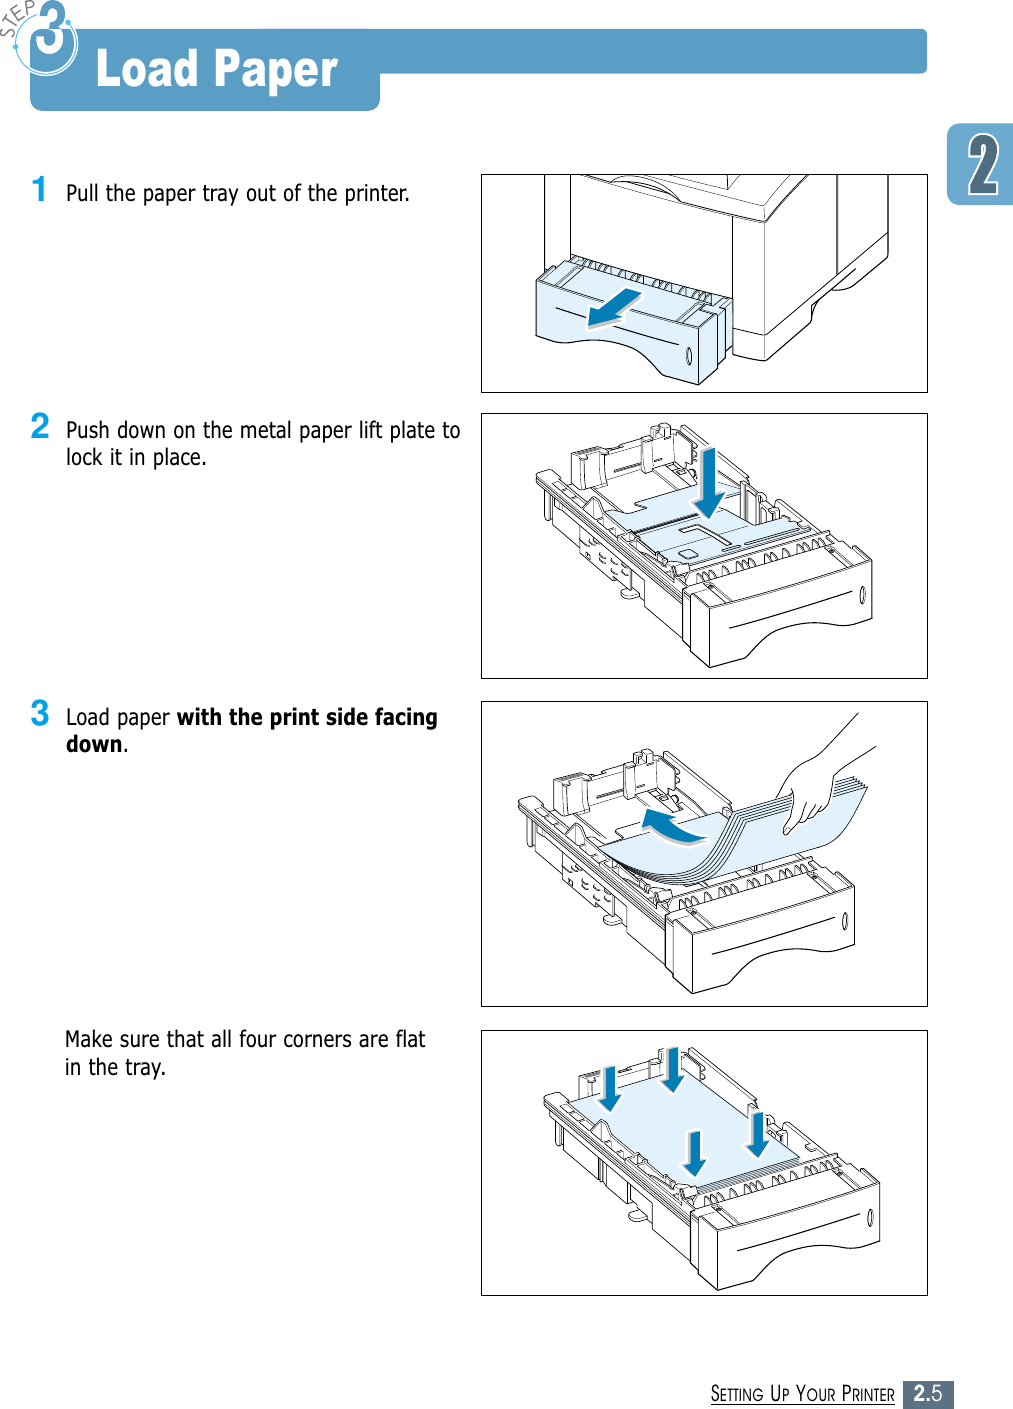 2.5SETTING UP YOUR PRINTER1Pull the paper tray out of the printer.3Load paper with the print side facingdown.Make sure that all four corners are flatin the tray.2Push down on the metal paper lift plate tolock it in place.Load Paper